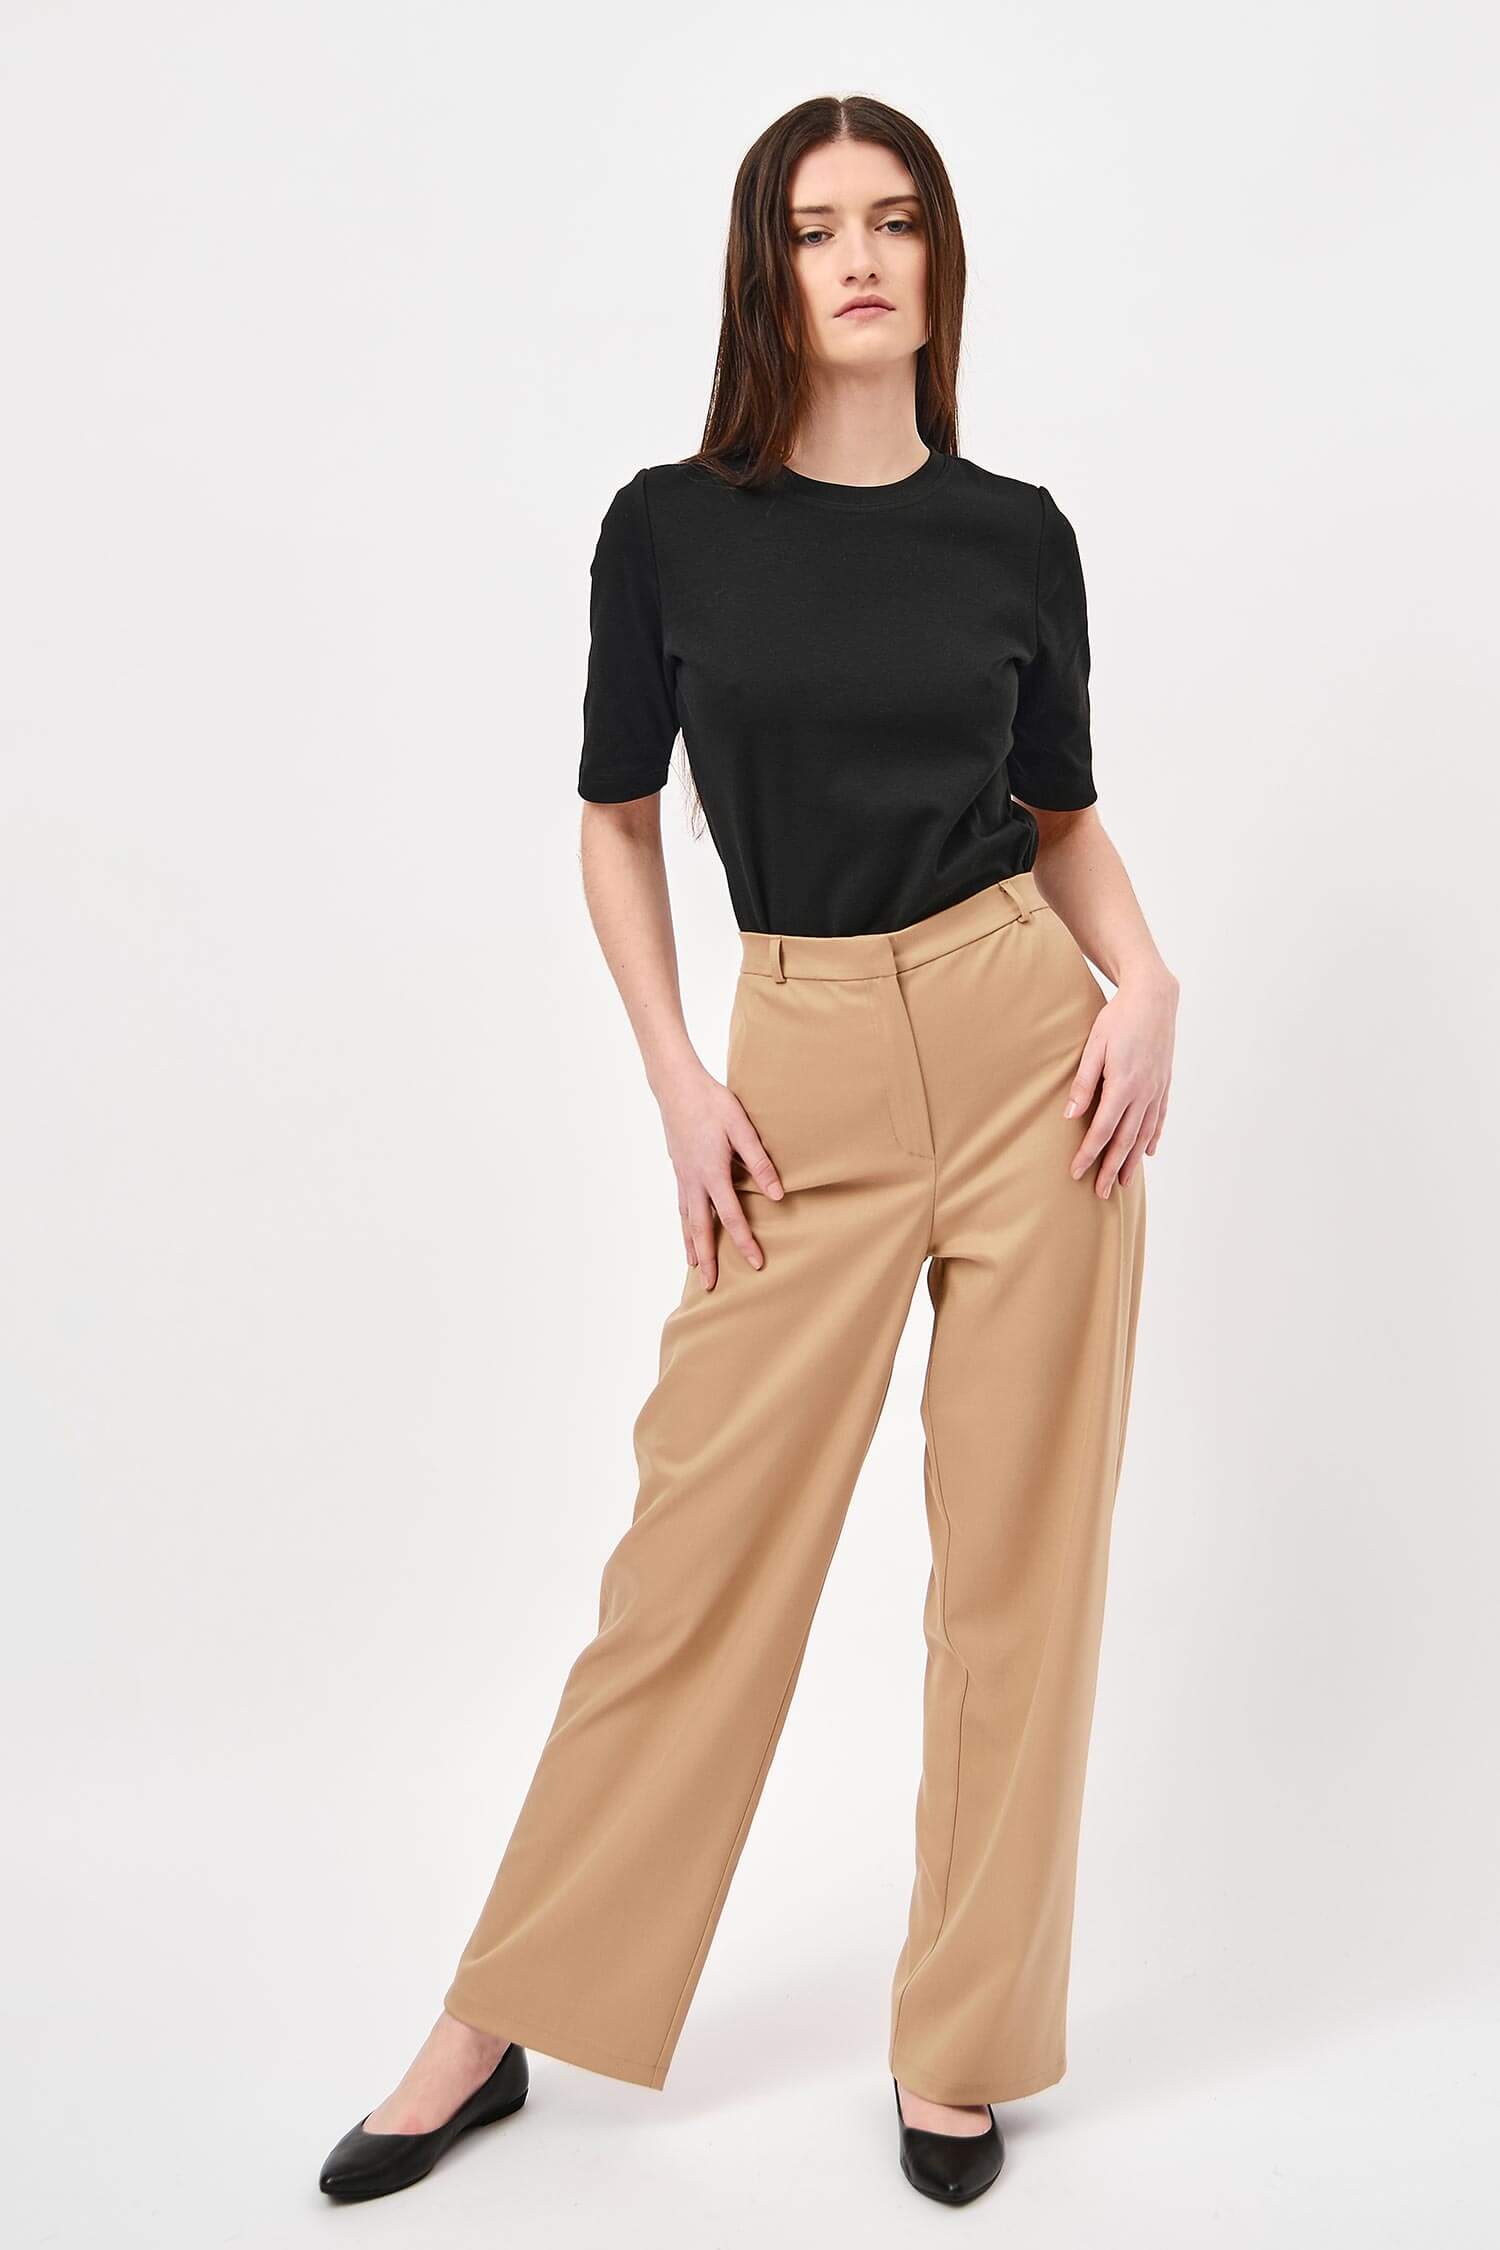 Women's Tailored Relaxed Straight Pant | Women's Clearance | Abercrombie.com